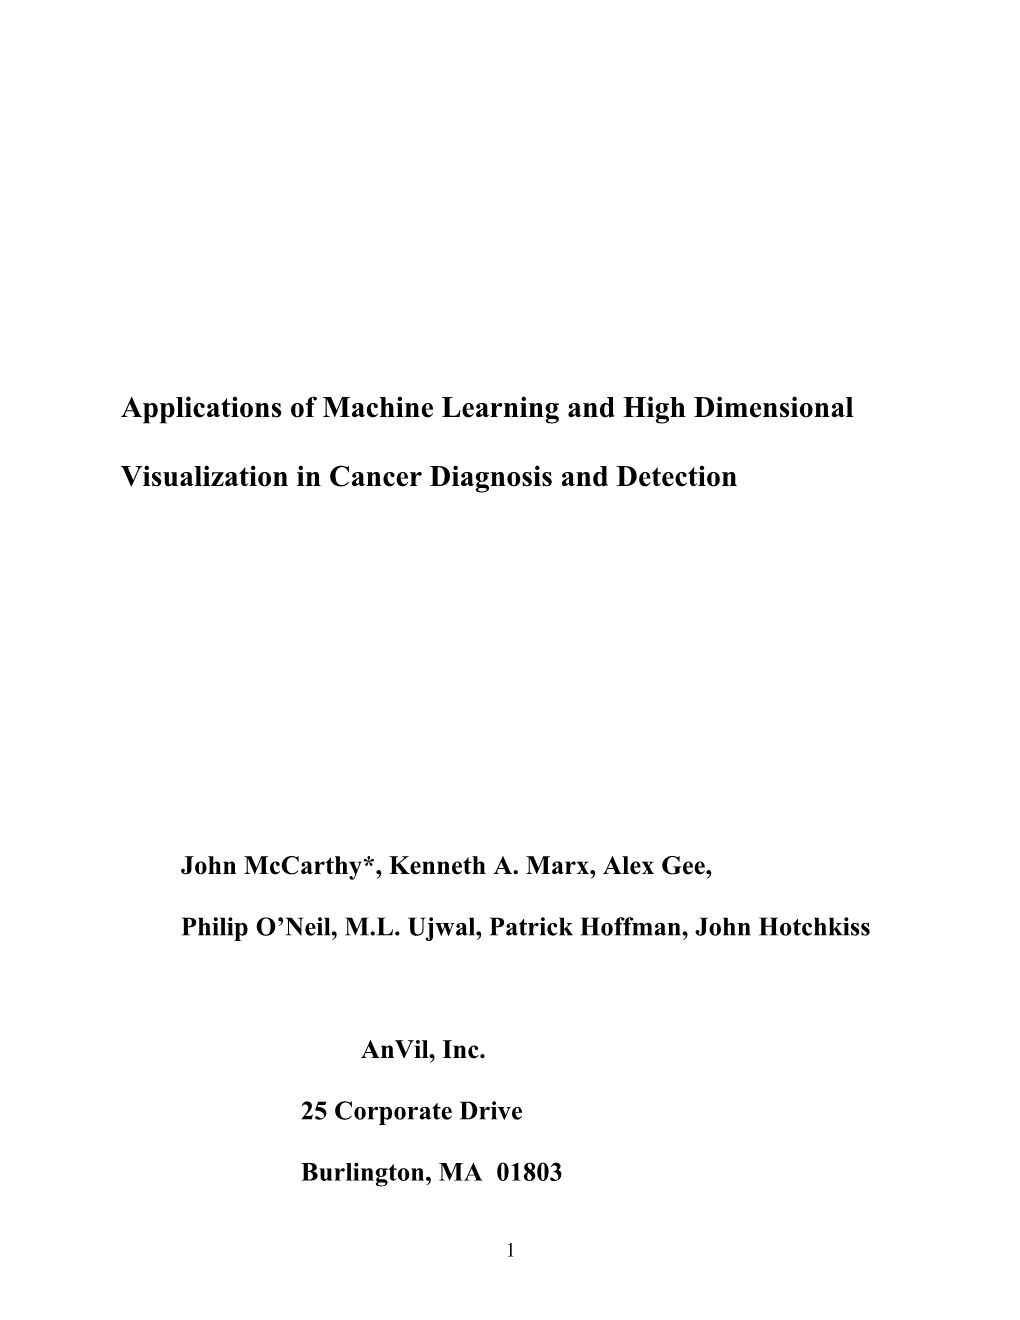 Applications of Machine Learning and High Dimensional Visualization in Cancer Diagnosis